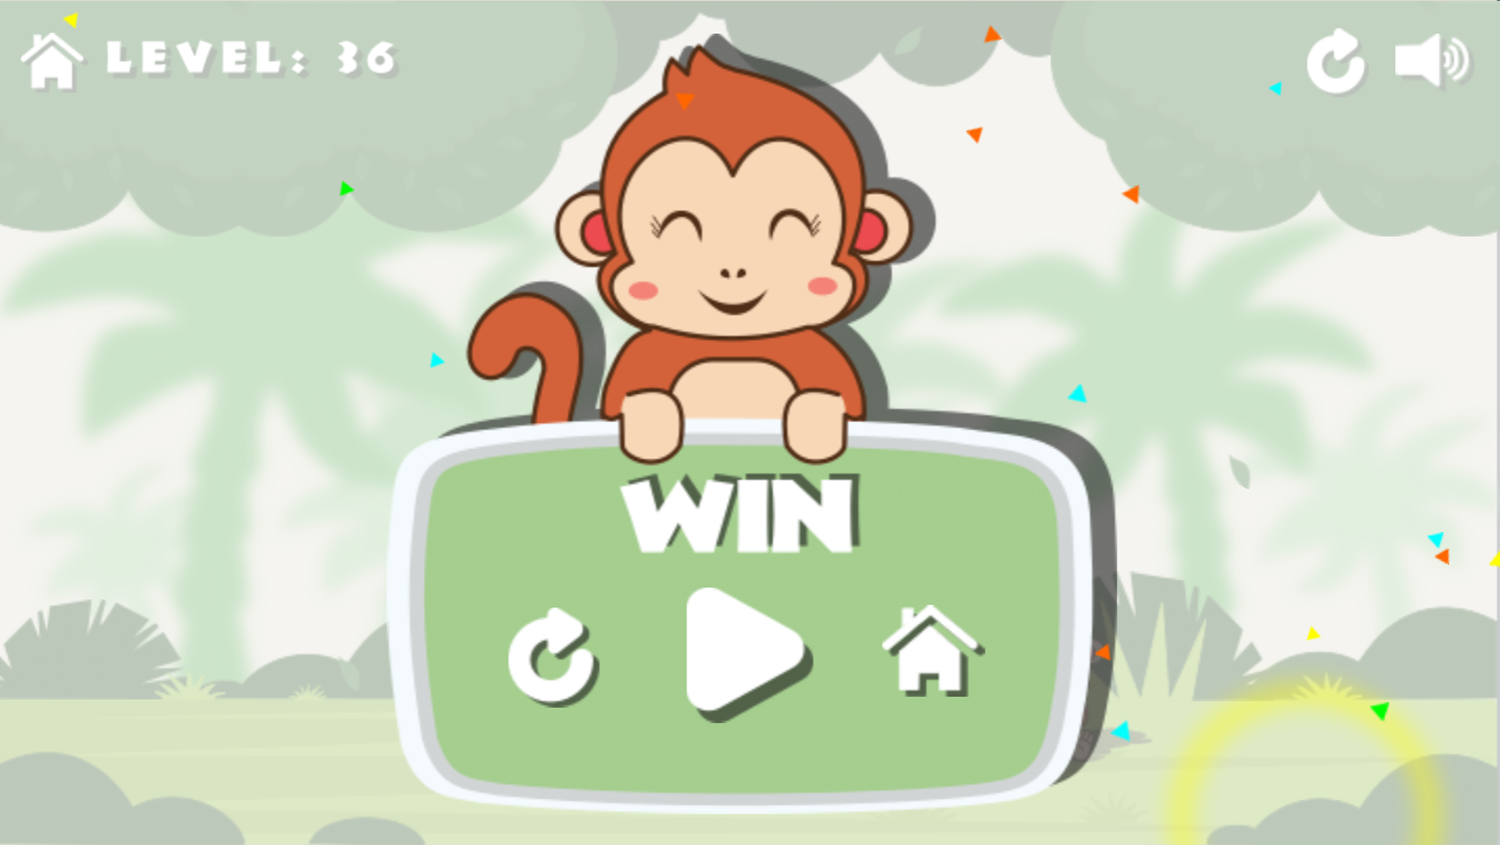 Monkeys and Fruits Game Level Complete Screen Screenshot.